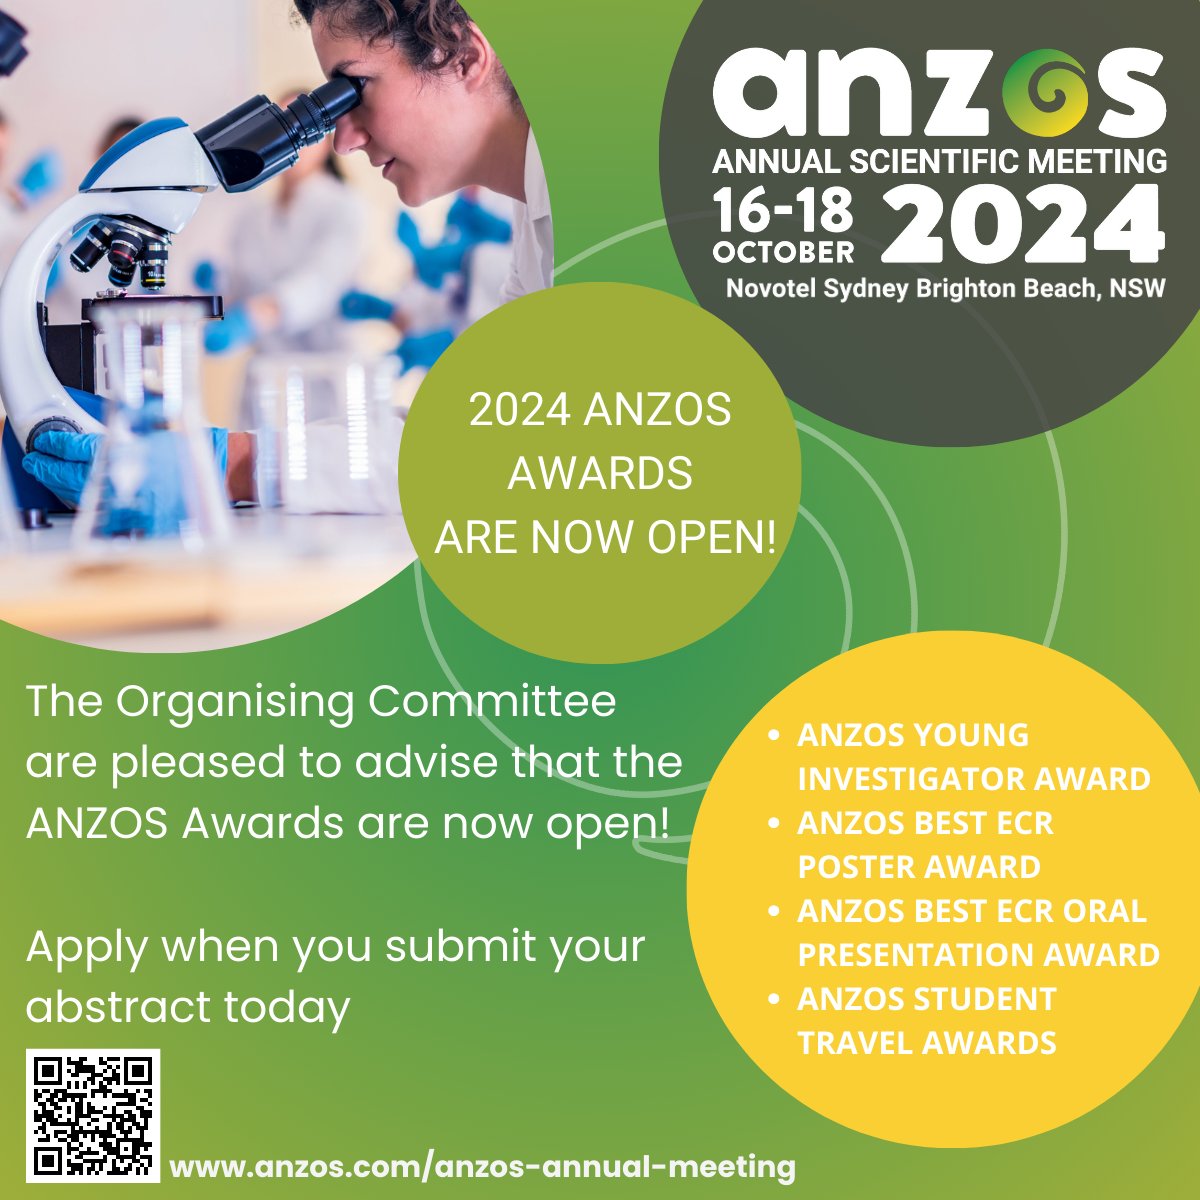 🏆 Calling our Early Career Researchers: The 2024 ANZOS Awards are now OPEN for submissions 🎉 Submit your abstract and apply for a chance to win prestigious awards and showcase your work! 🏅 Find out about our #ANZOS2024 awards here: anzos.com/available-awar… #ECR